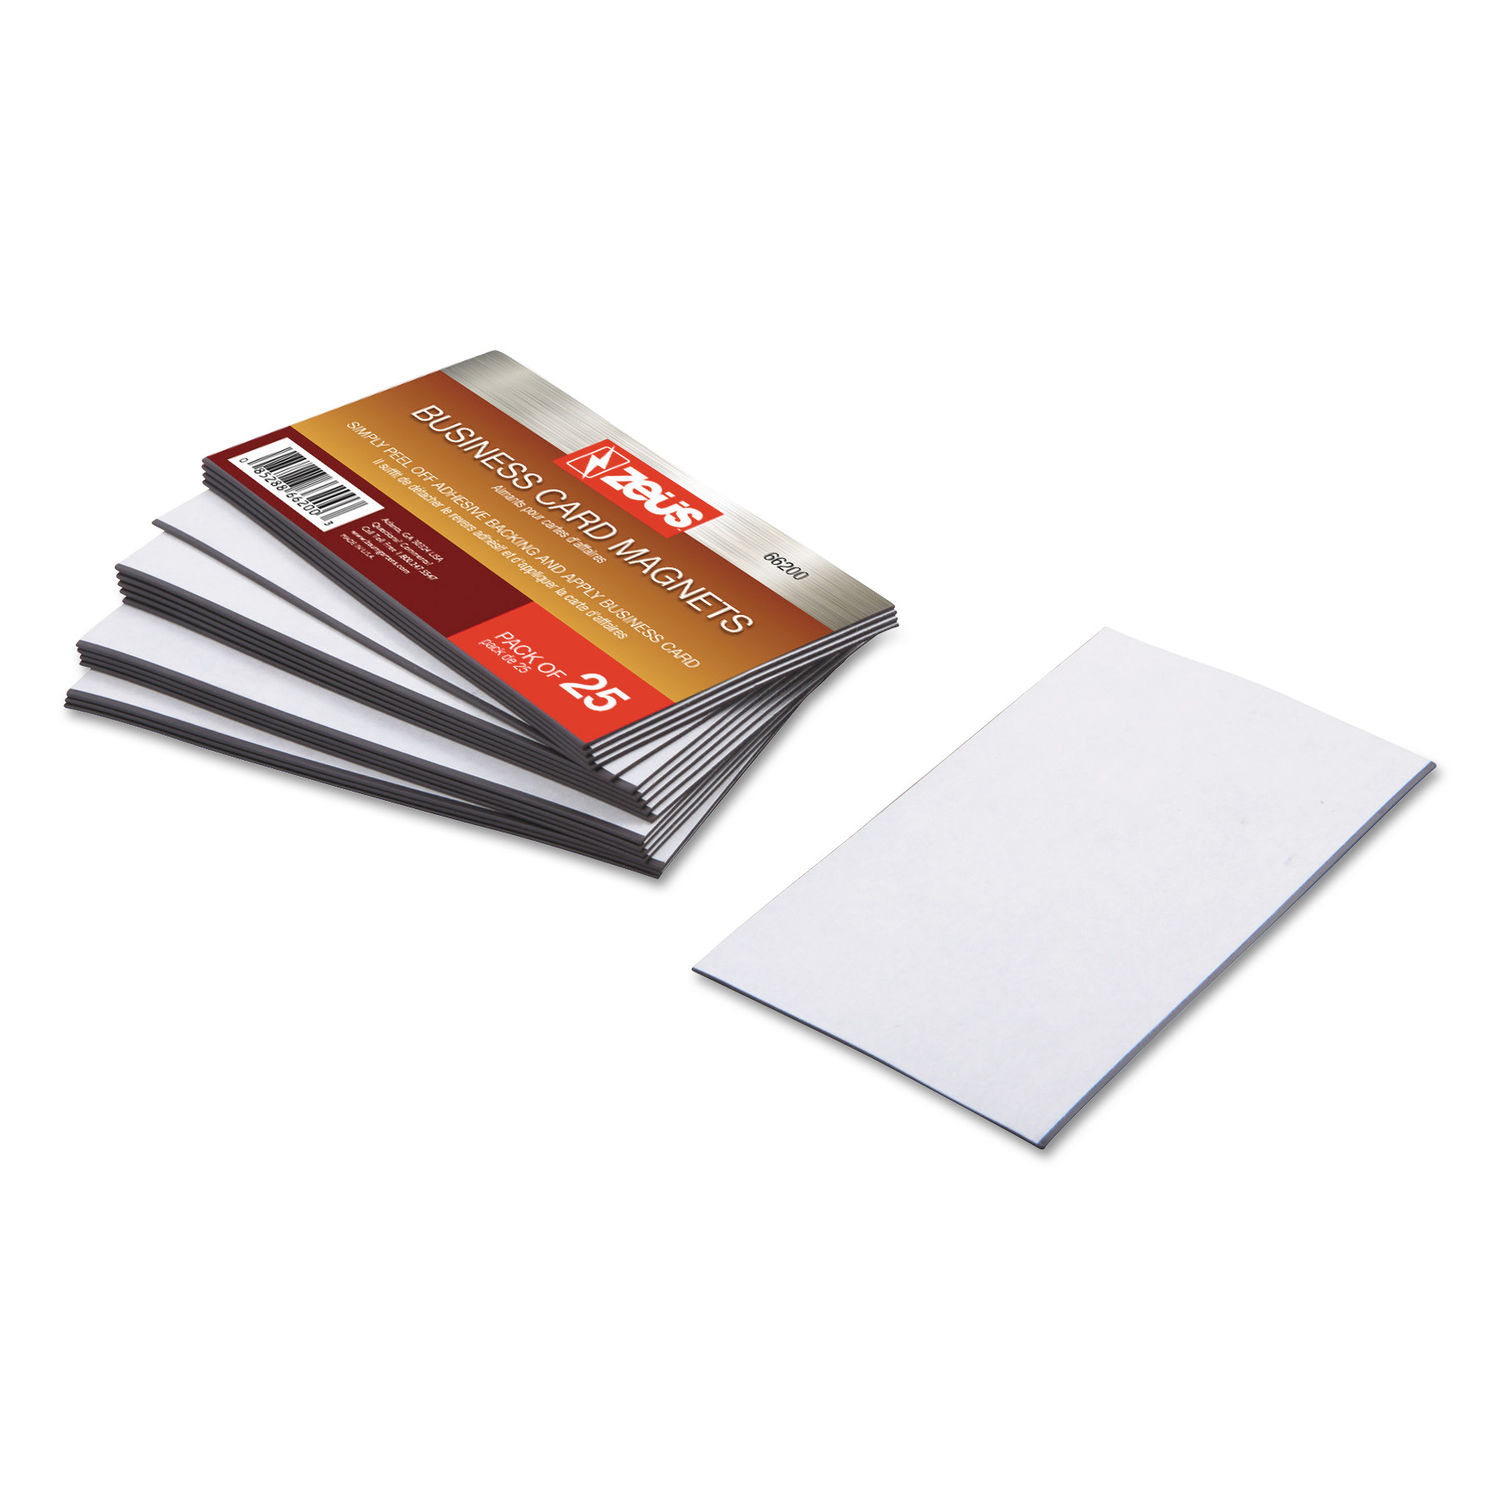 Business Card Magnets 2 x 3.5, White, Adhesive Coated, 25/Pack